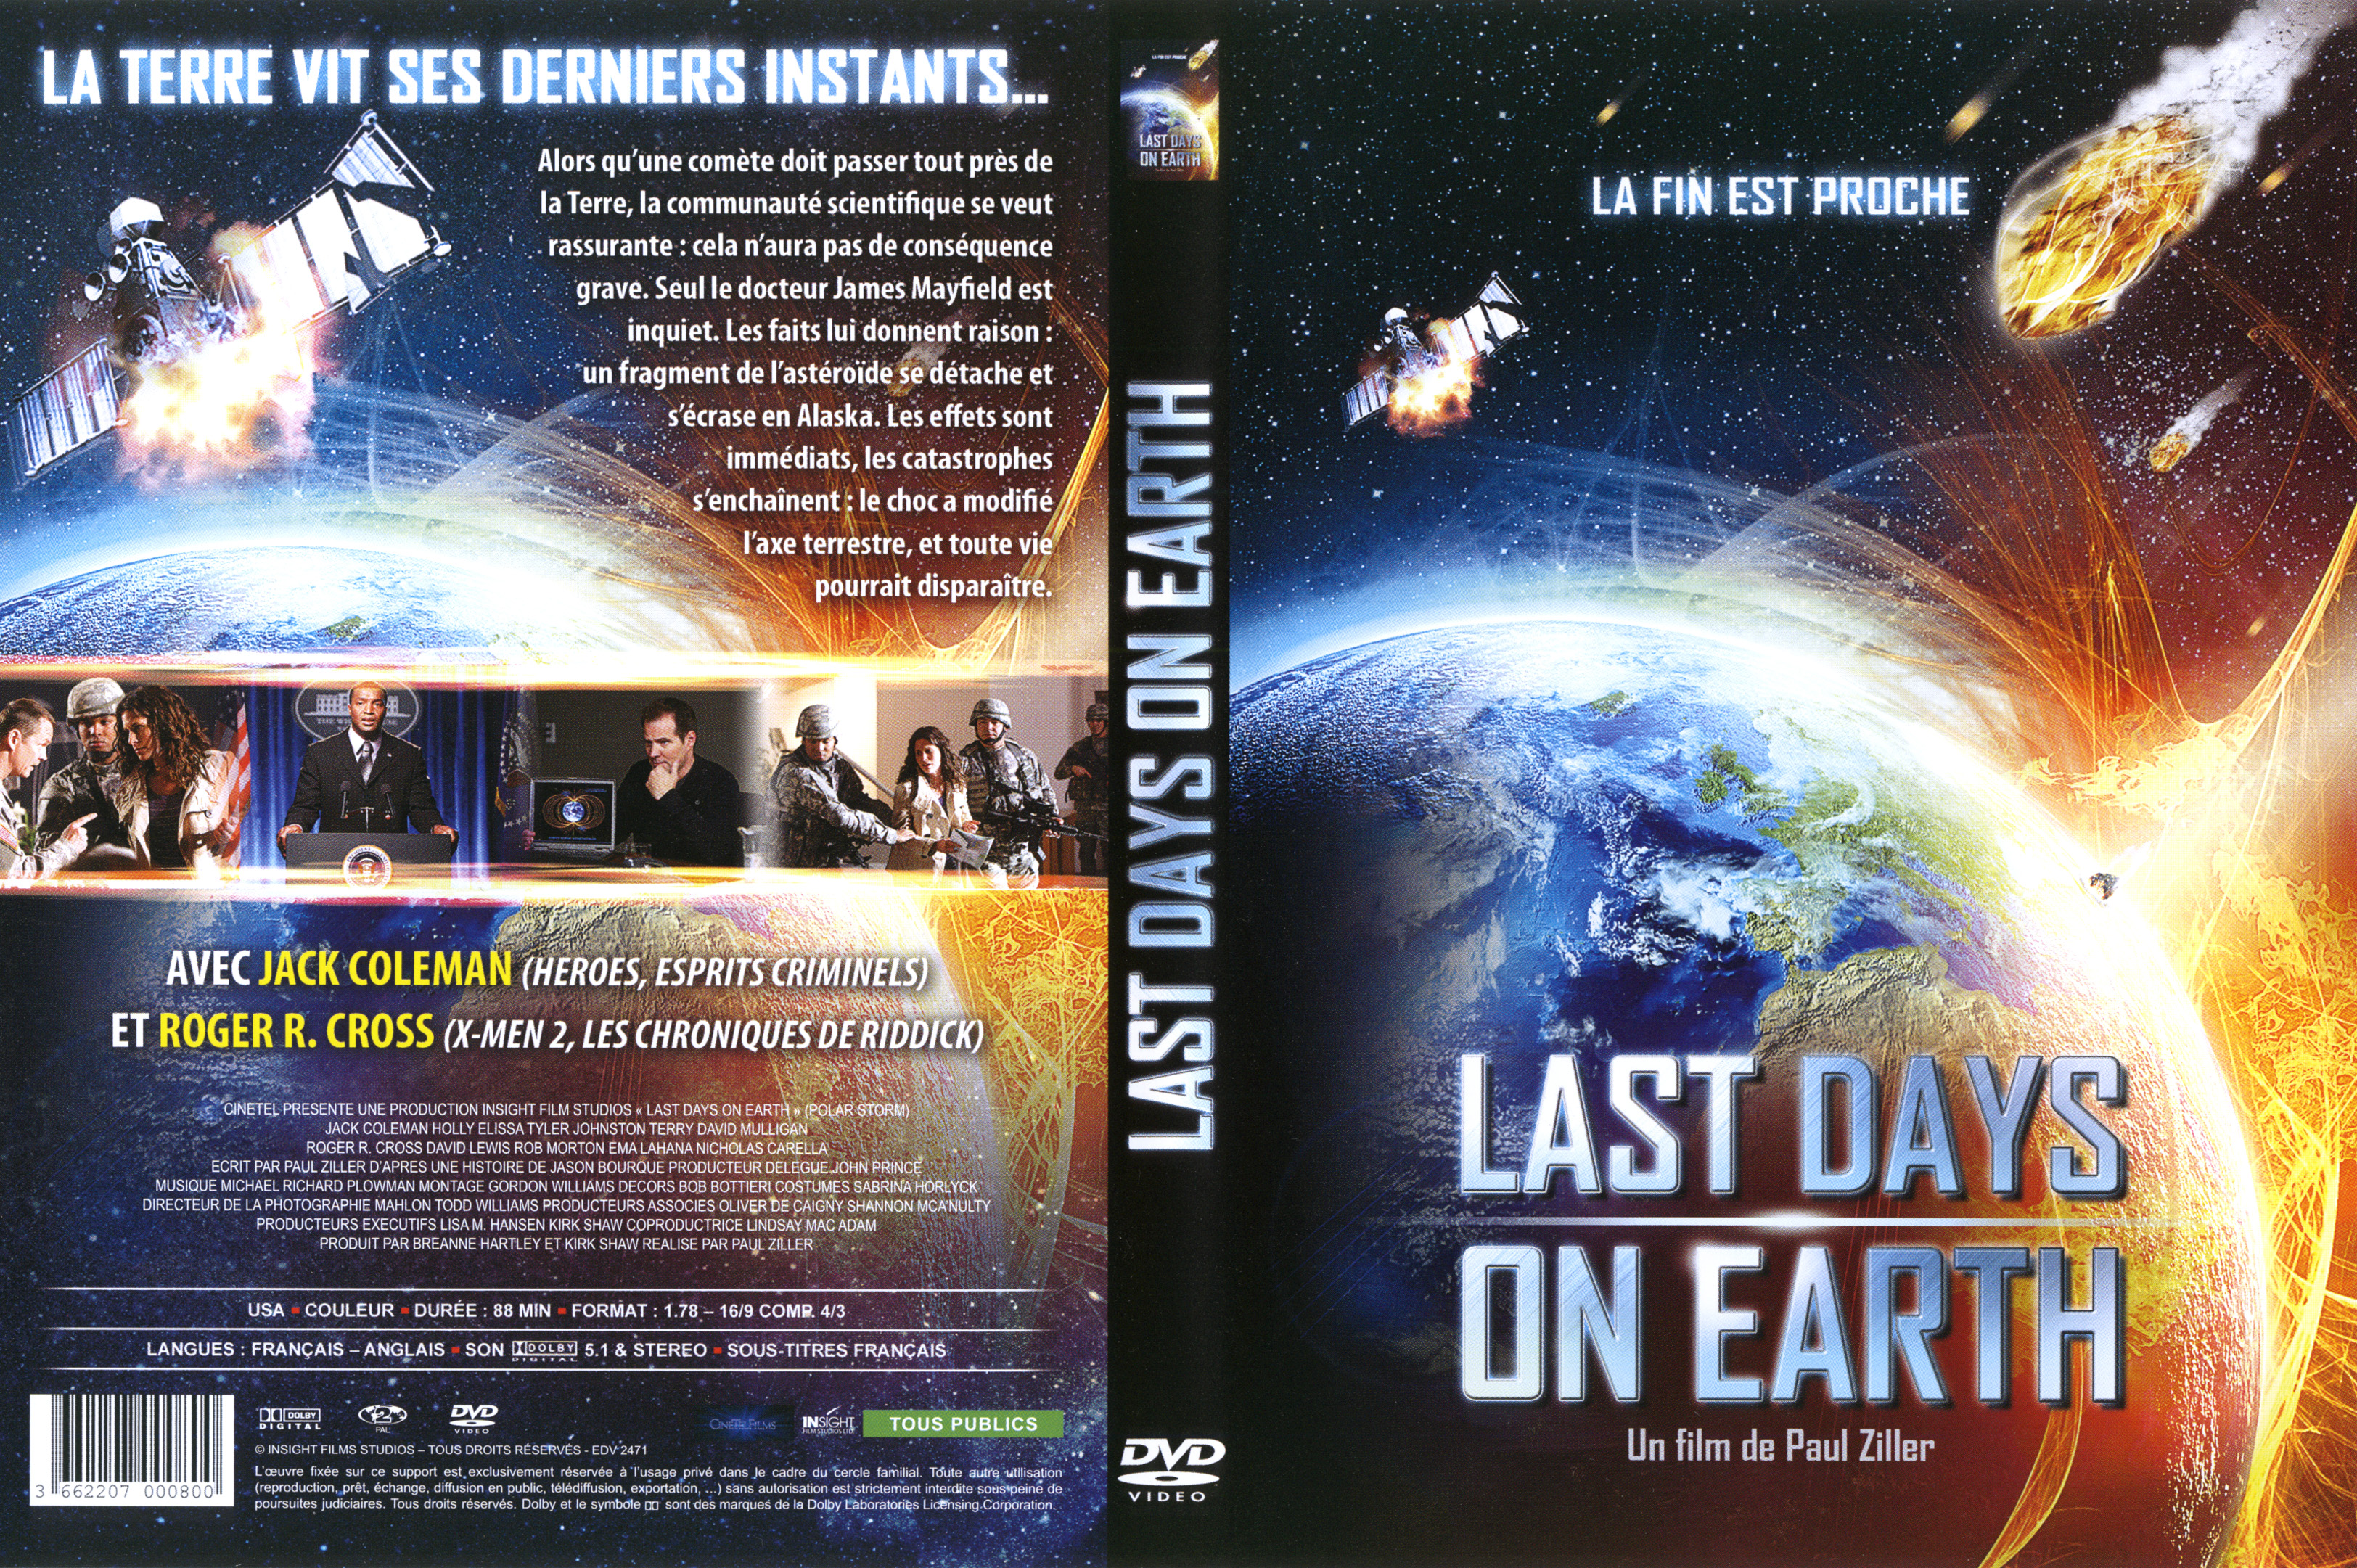 Jaquette DVD Last days on earth